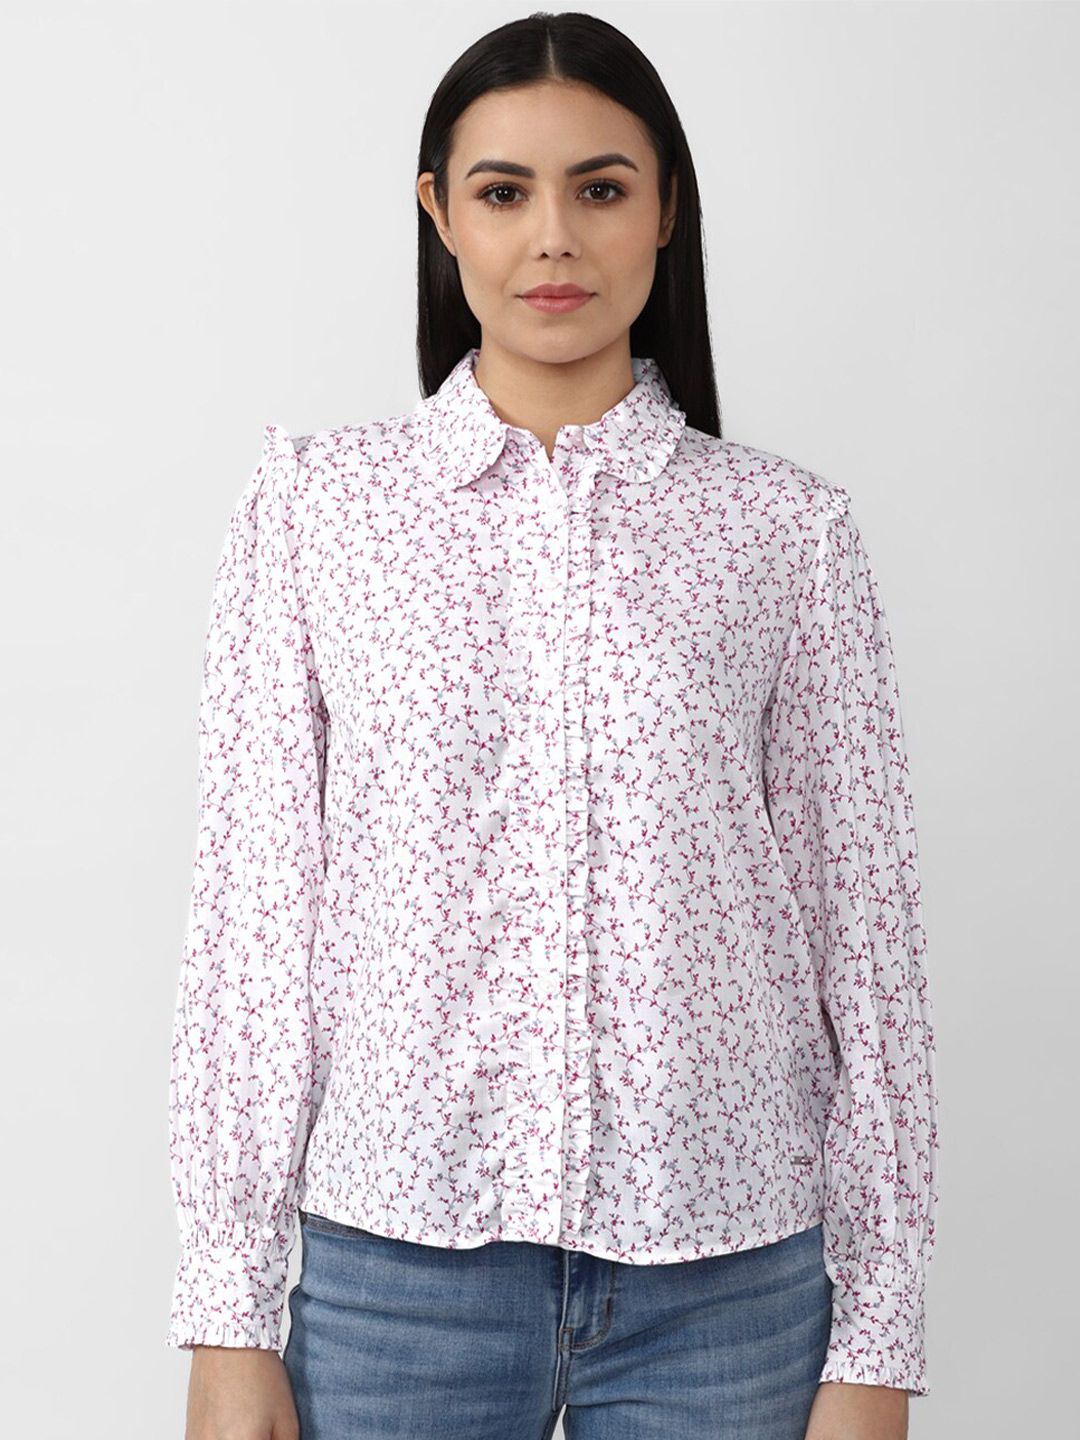 Van Heusen Woman White Floral Print Shirt Style Top Price in India